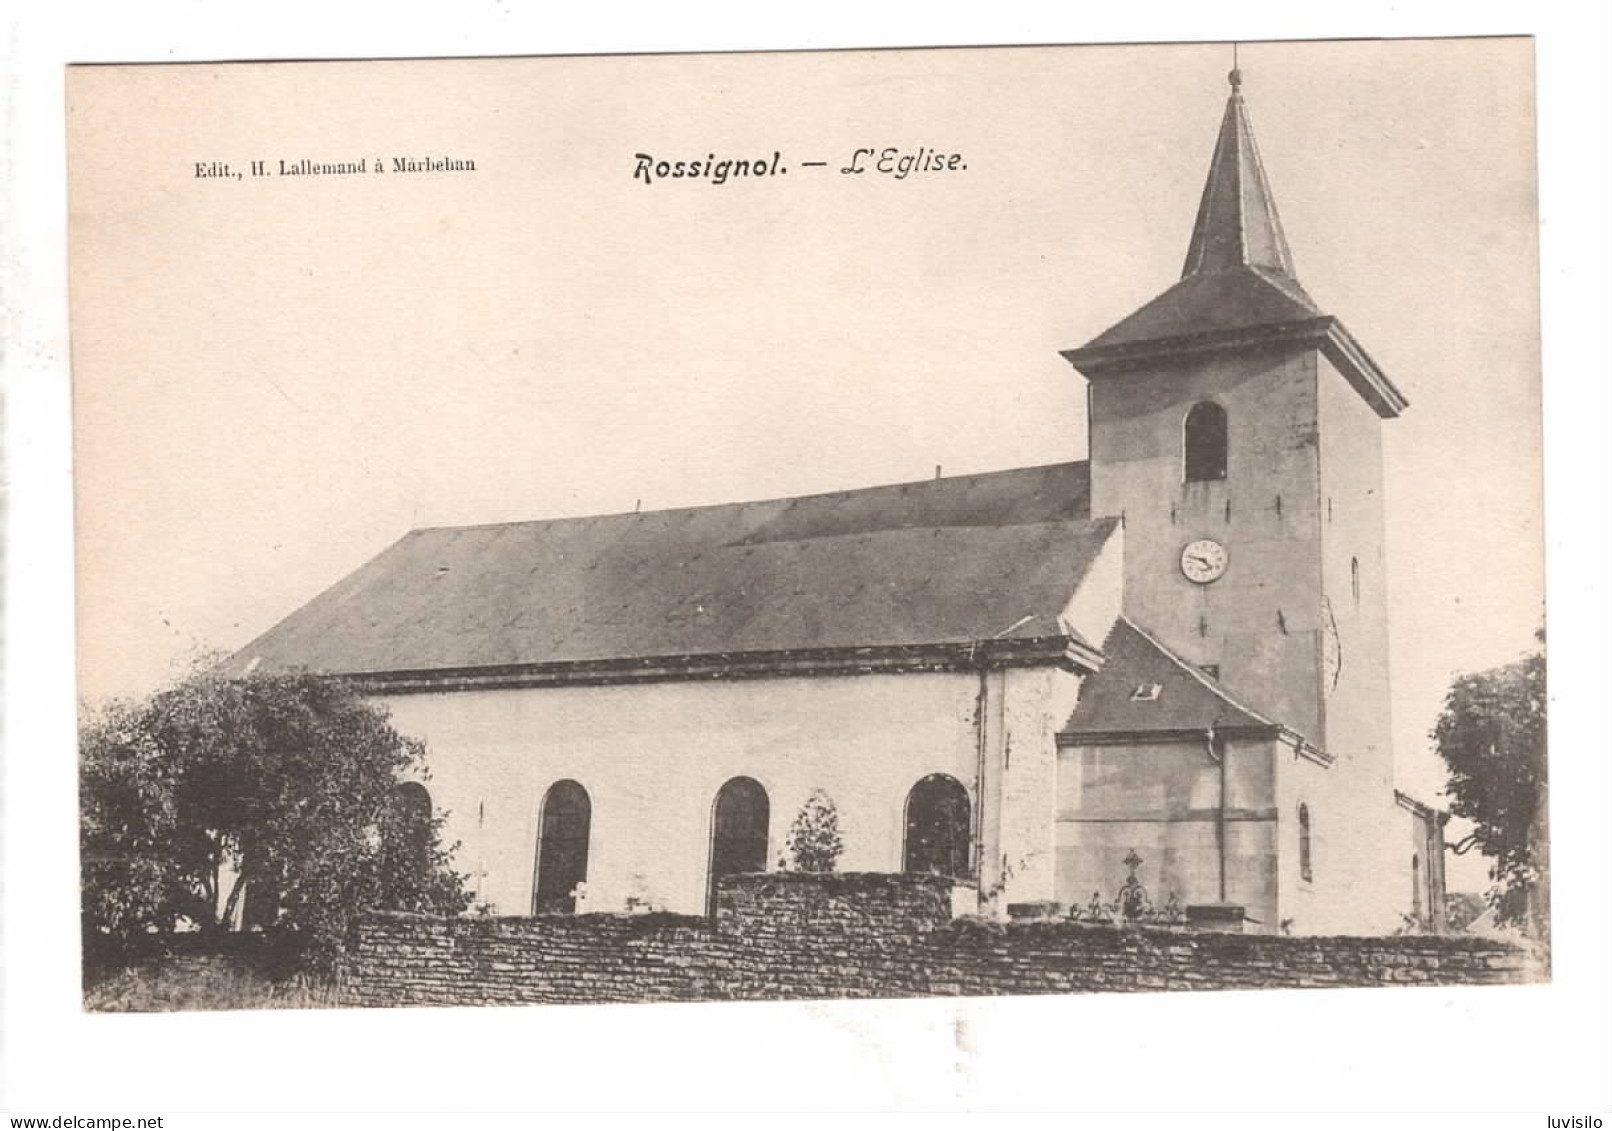 Rossignol Eglise ( Edition Lallemand Marbehan ) - Tintigny